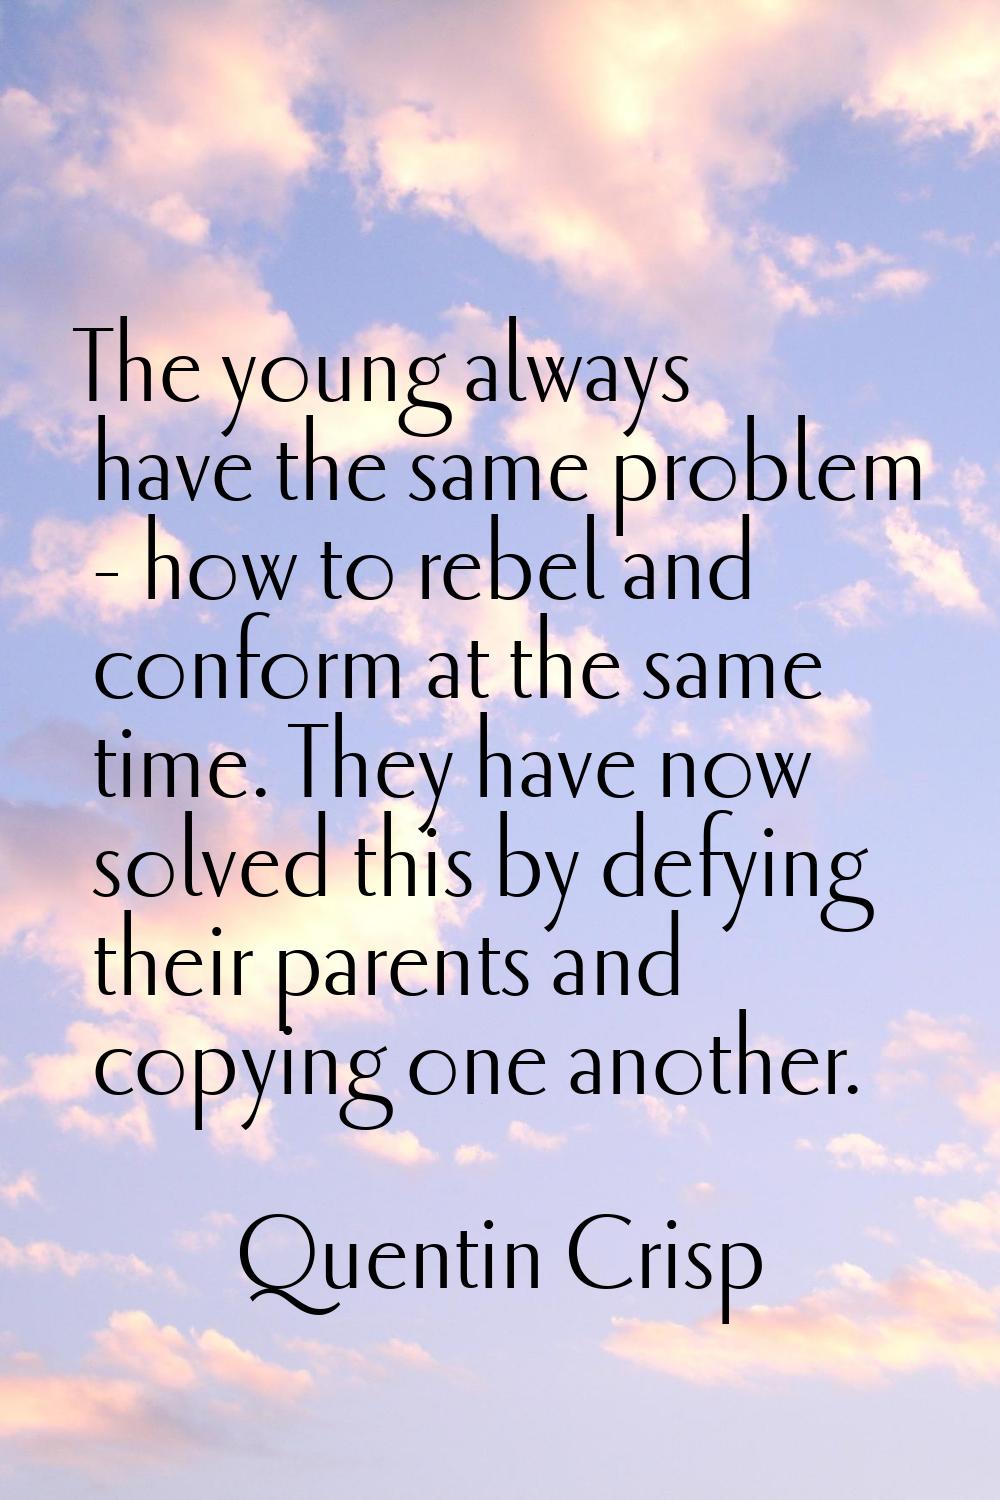 The young always have the same problem - how to rebel and conform at the same time. They have now s